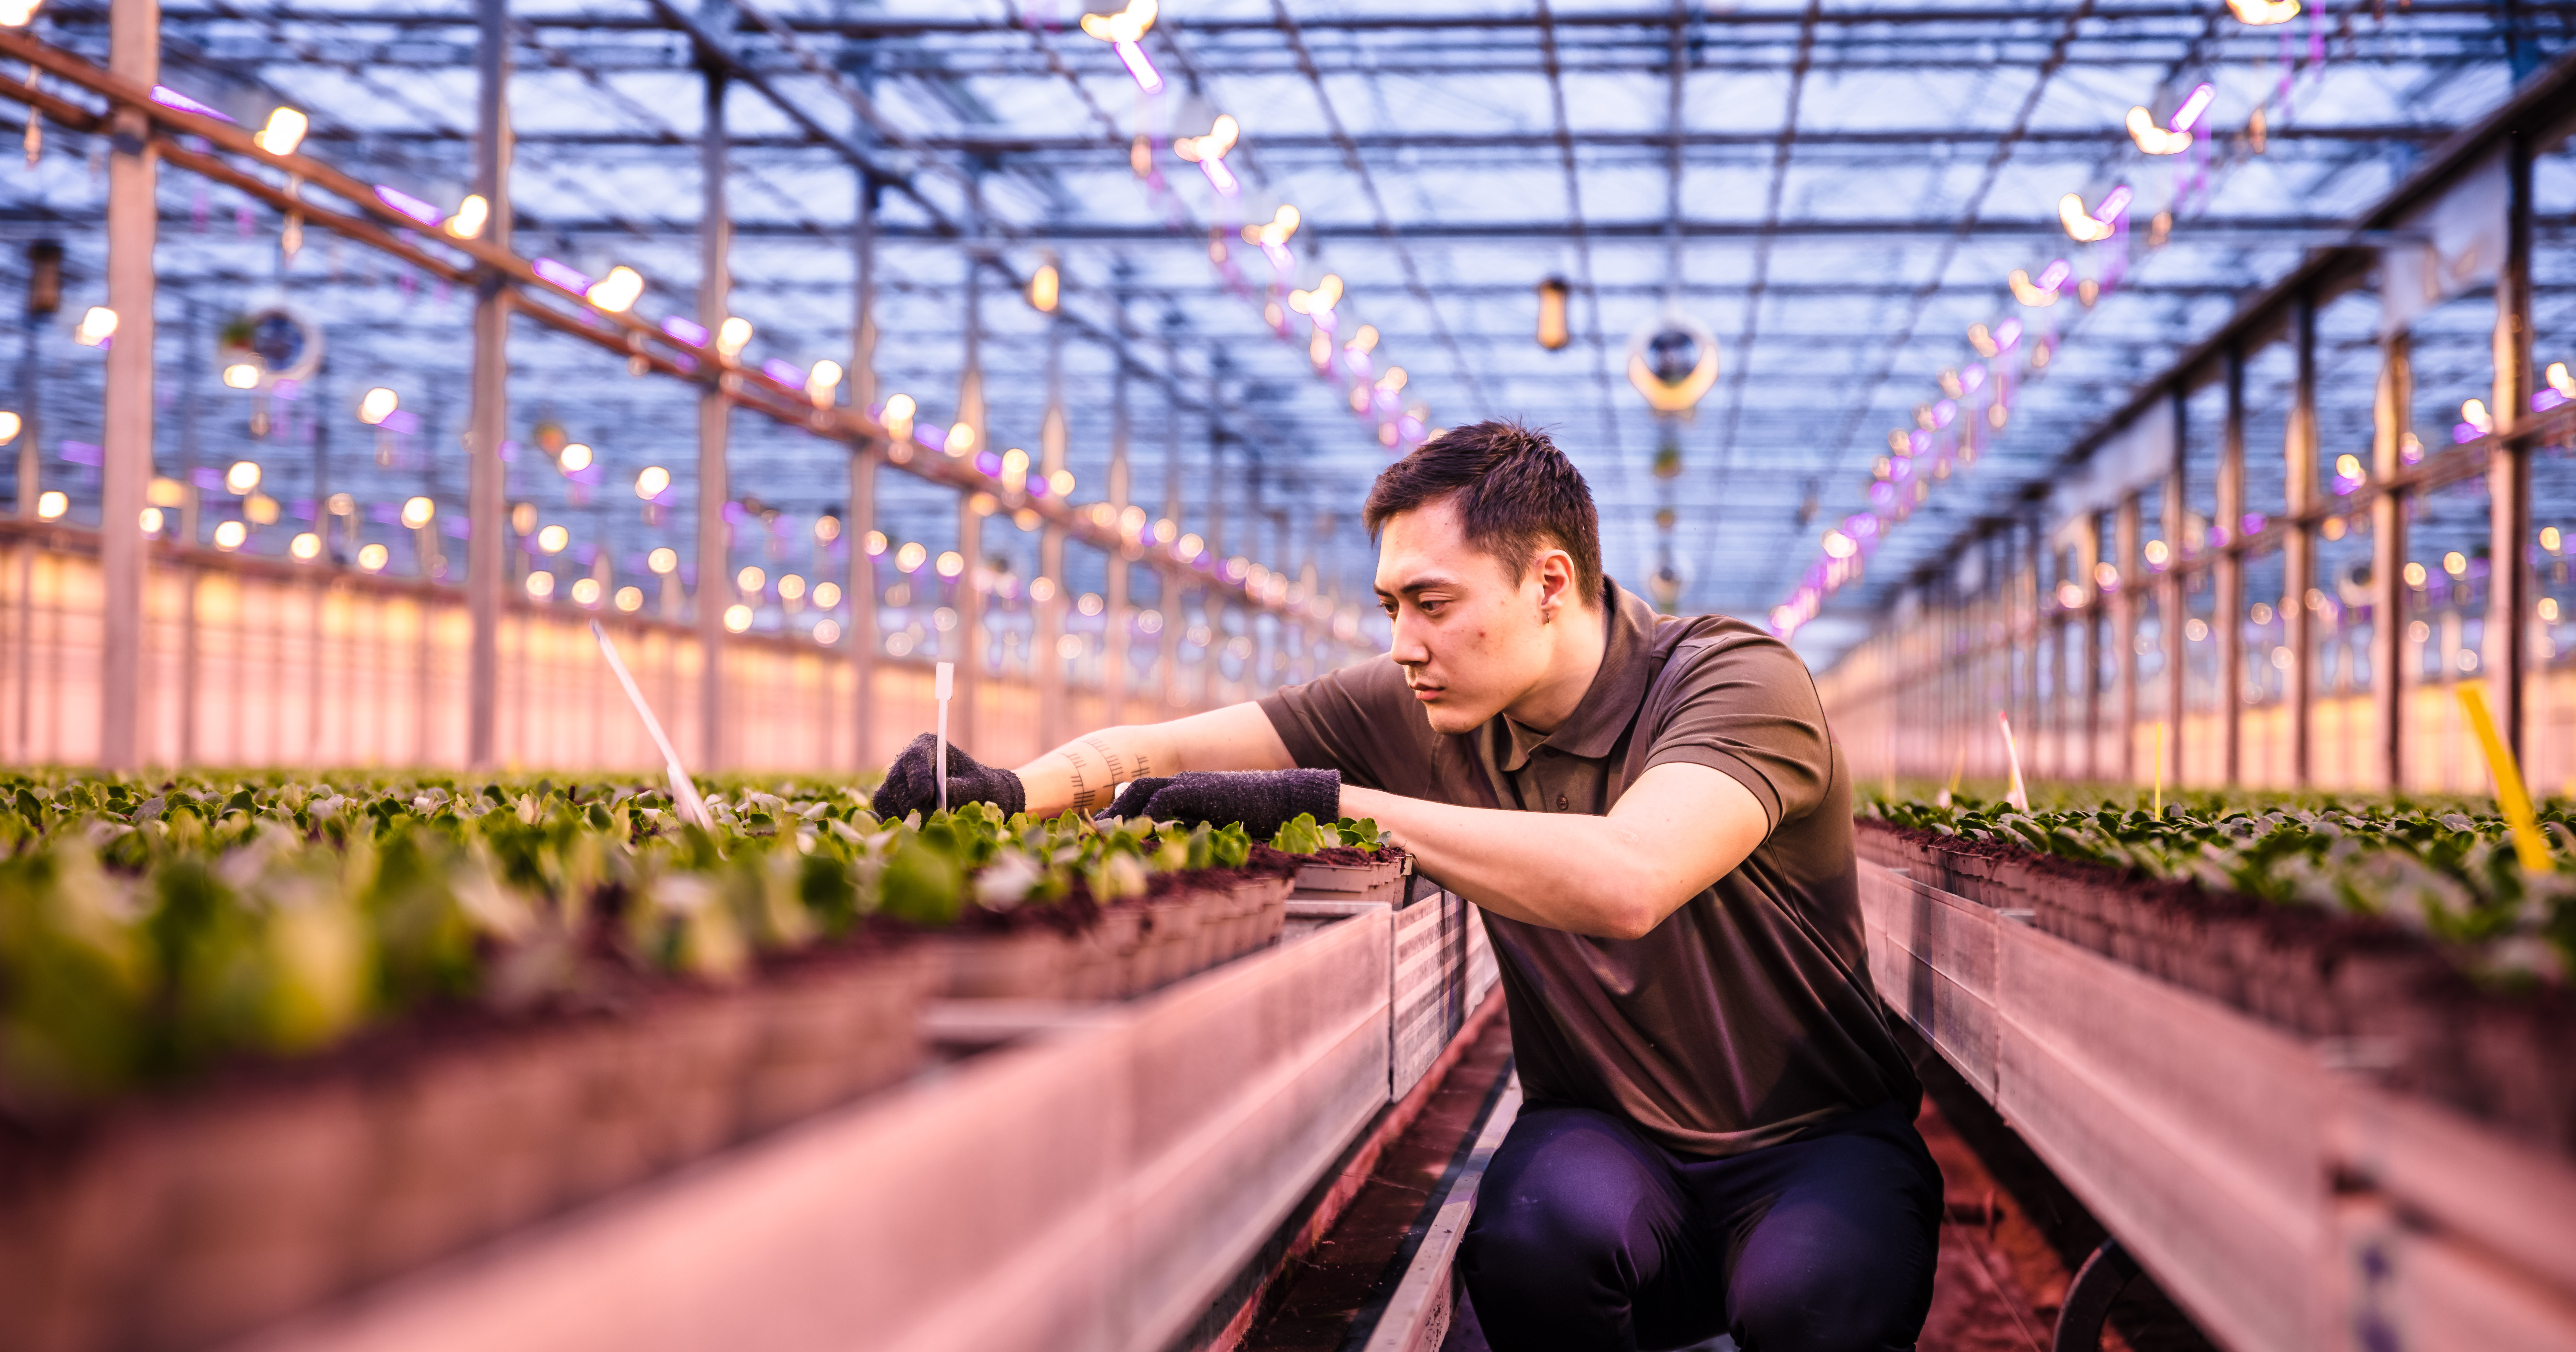 Greenhouse with energy-efficient LED lamps by Dutch company Signify